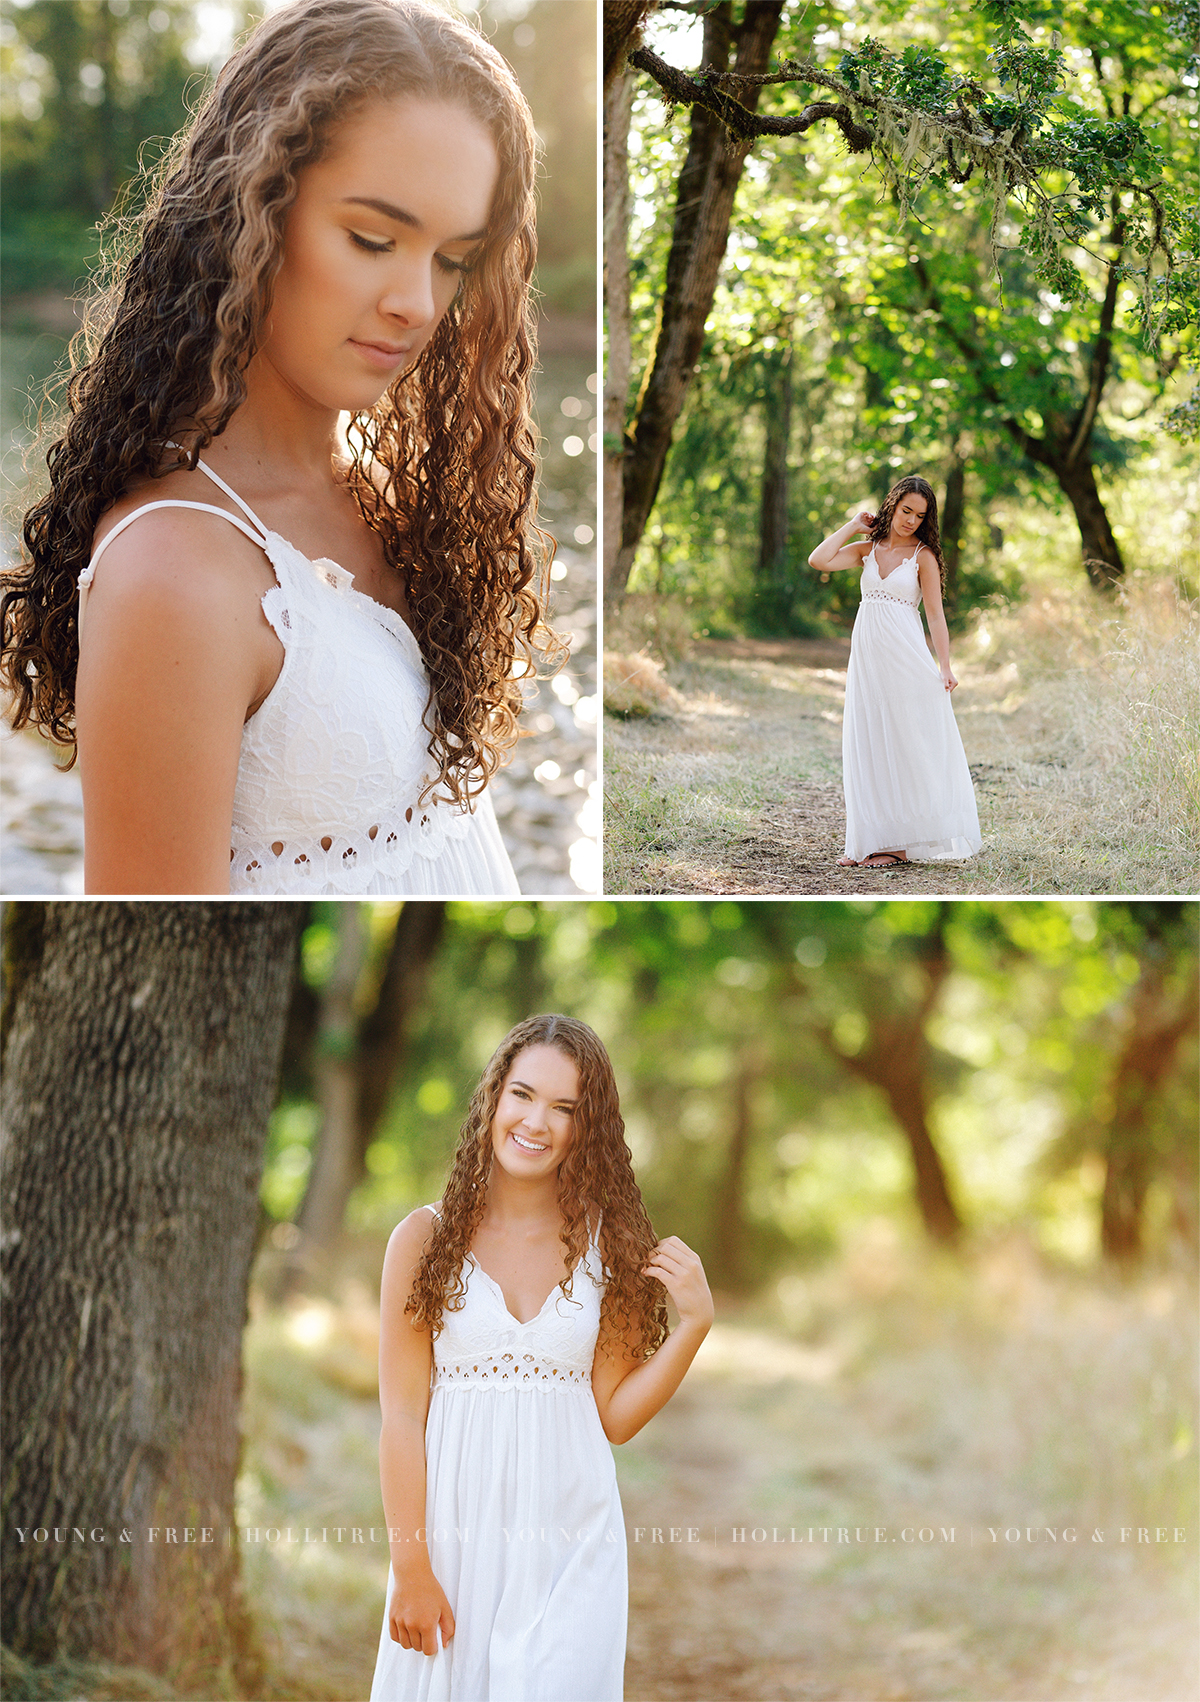 Beautiful Natural Senior Photography in a lush, natural park in Eugene, Oregon by Holli True